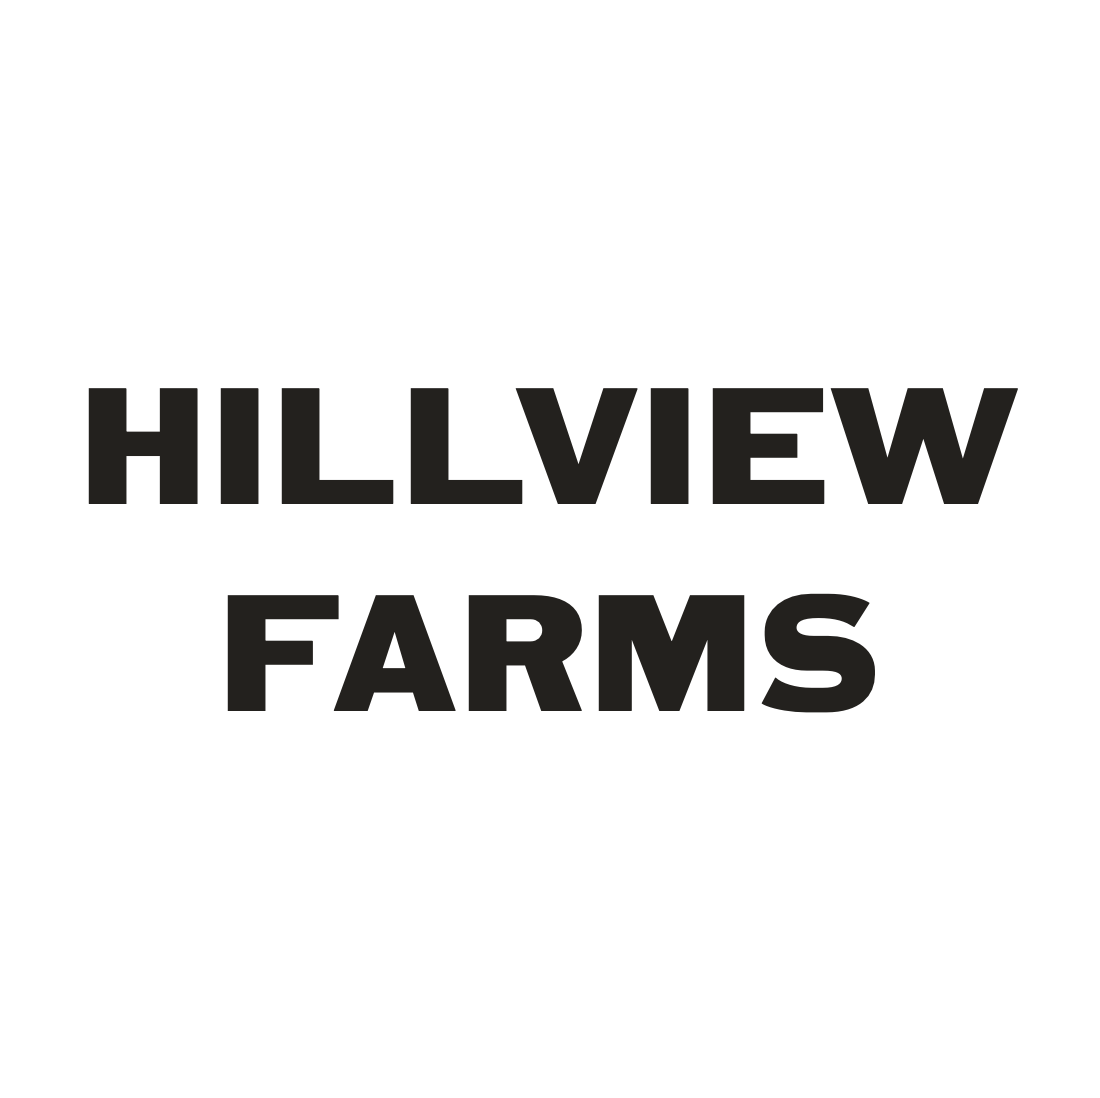 Hillview Farms.png